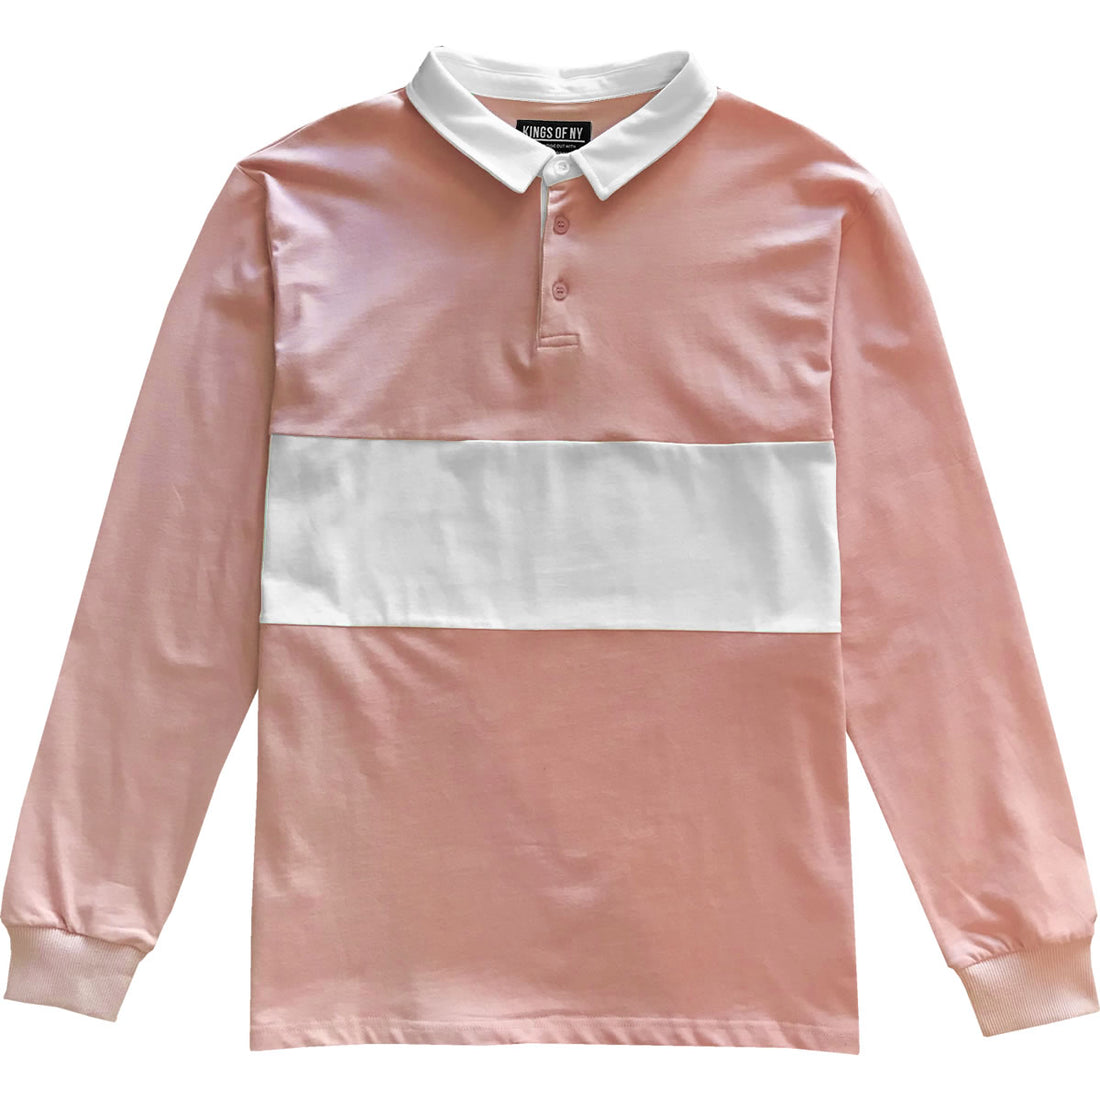 Mens Dusty Pink and White Striped Long Sleeve Polo Rugby Shirt